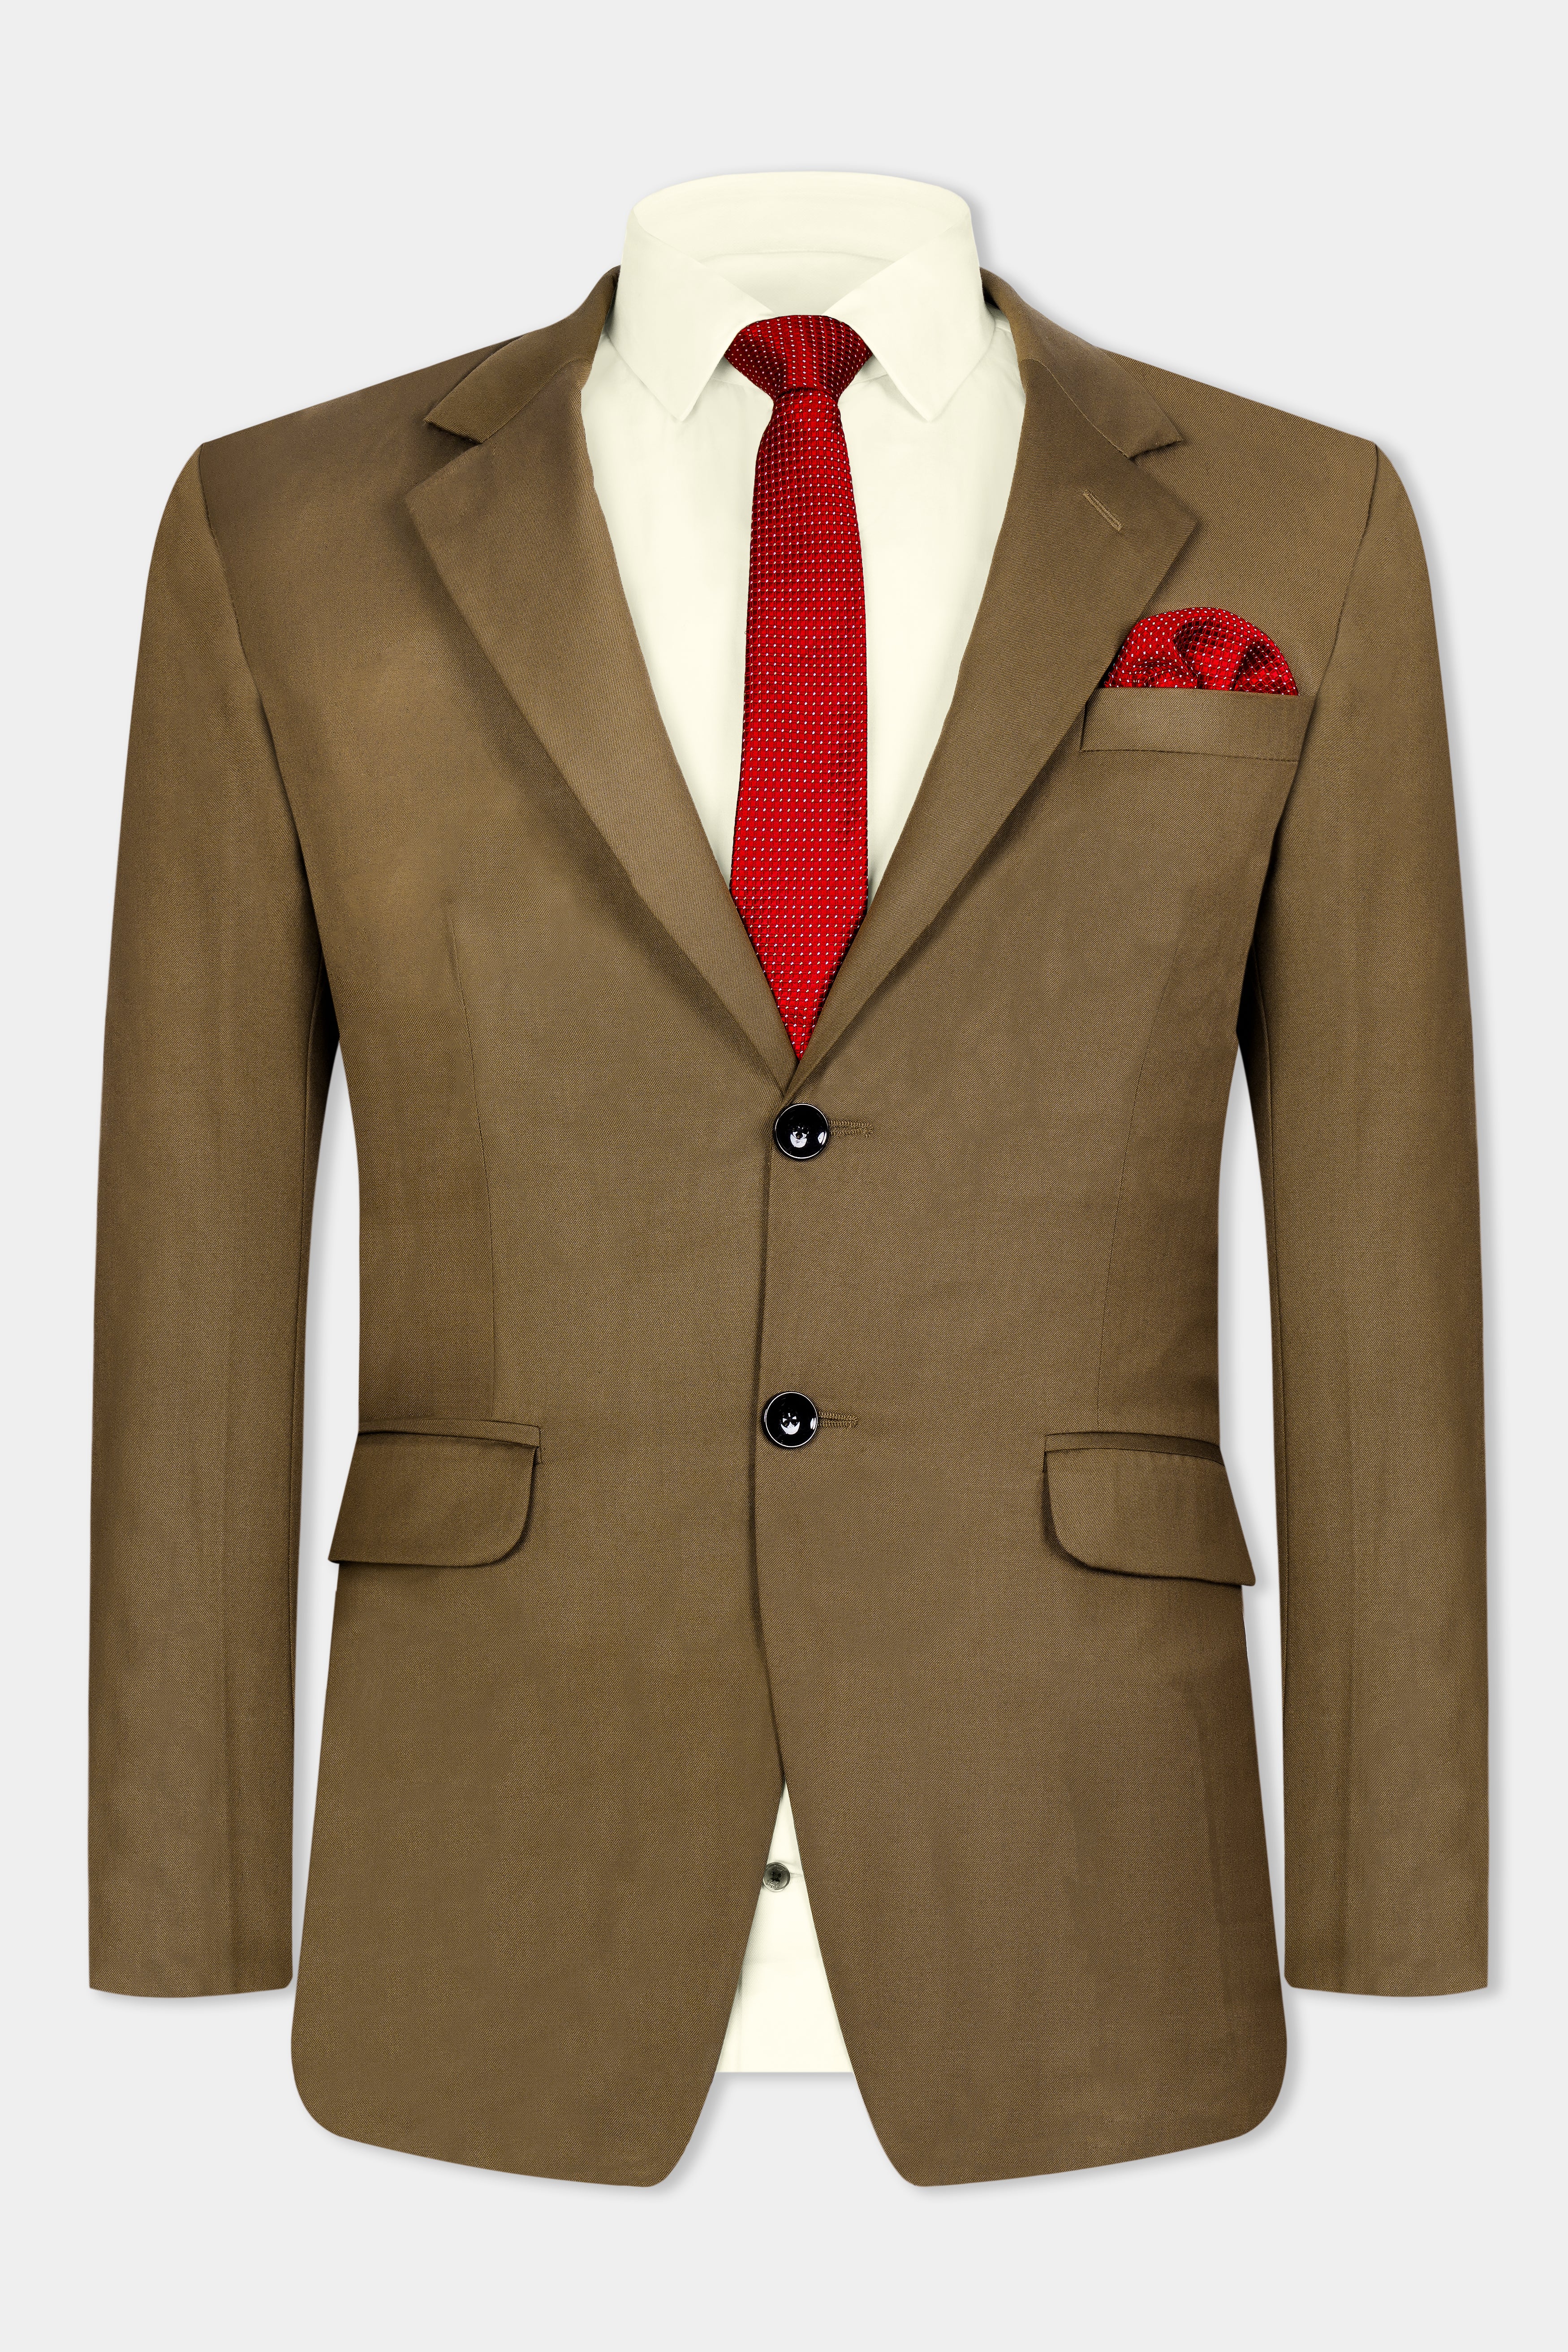 Tortilla Brown Wool Rich Single Breasted Blazer BL3068-SB-36, BL3068-SB-38, BL3068-SB-40, BL3068-SB-42, BL3068-SB-44, BL3068-SB-46, BL3068-SB-48, BL3068-SB-50, BL3068-SB-52, BL3068-SB-54, BL3068-SB-56, BL3068-SB-58, BL3068-SB-60